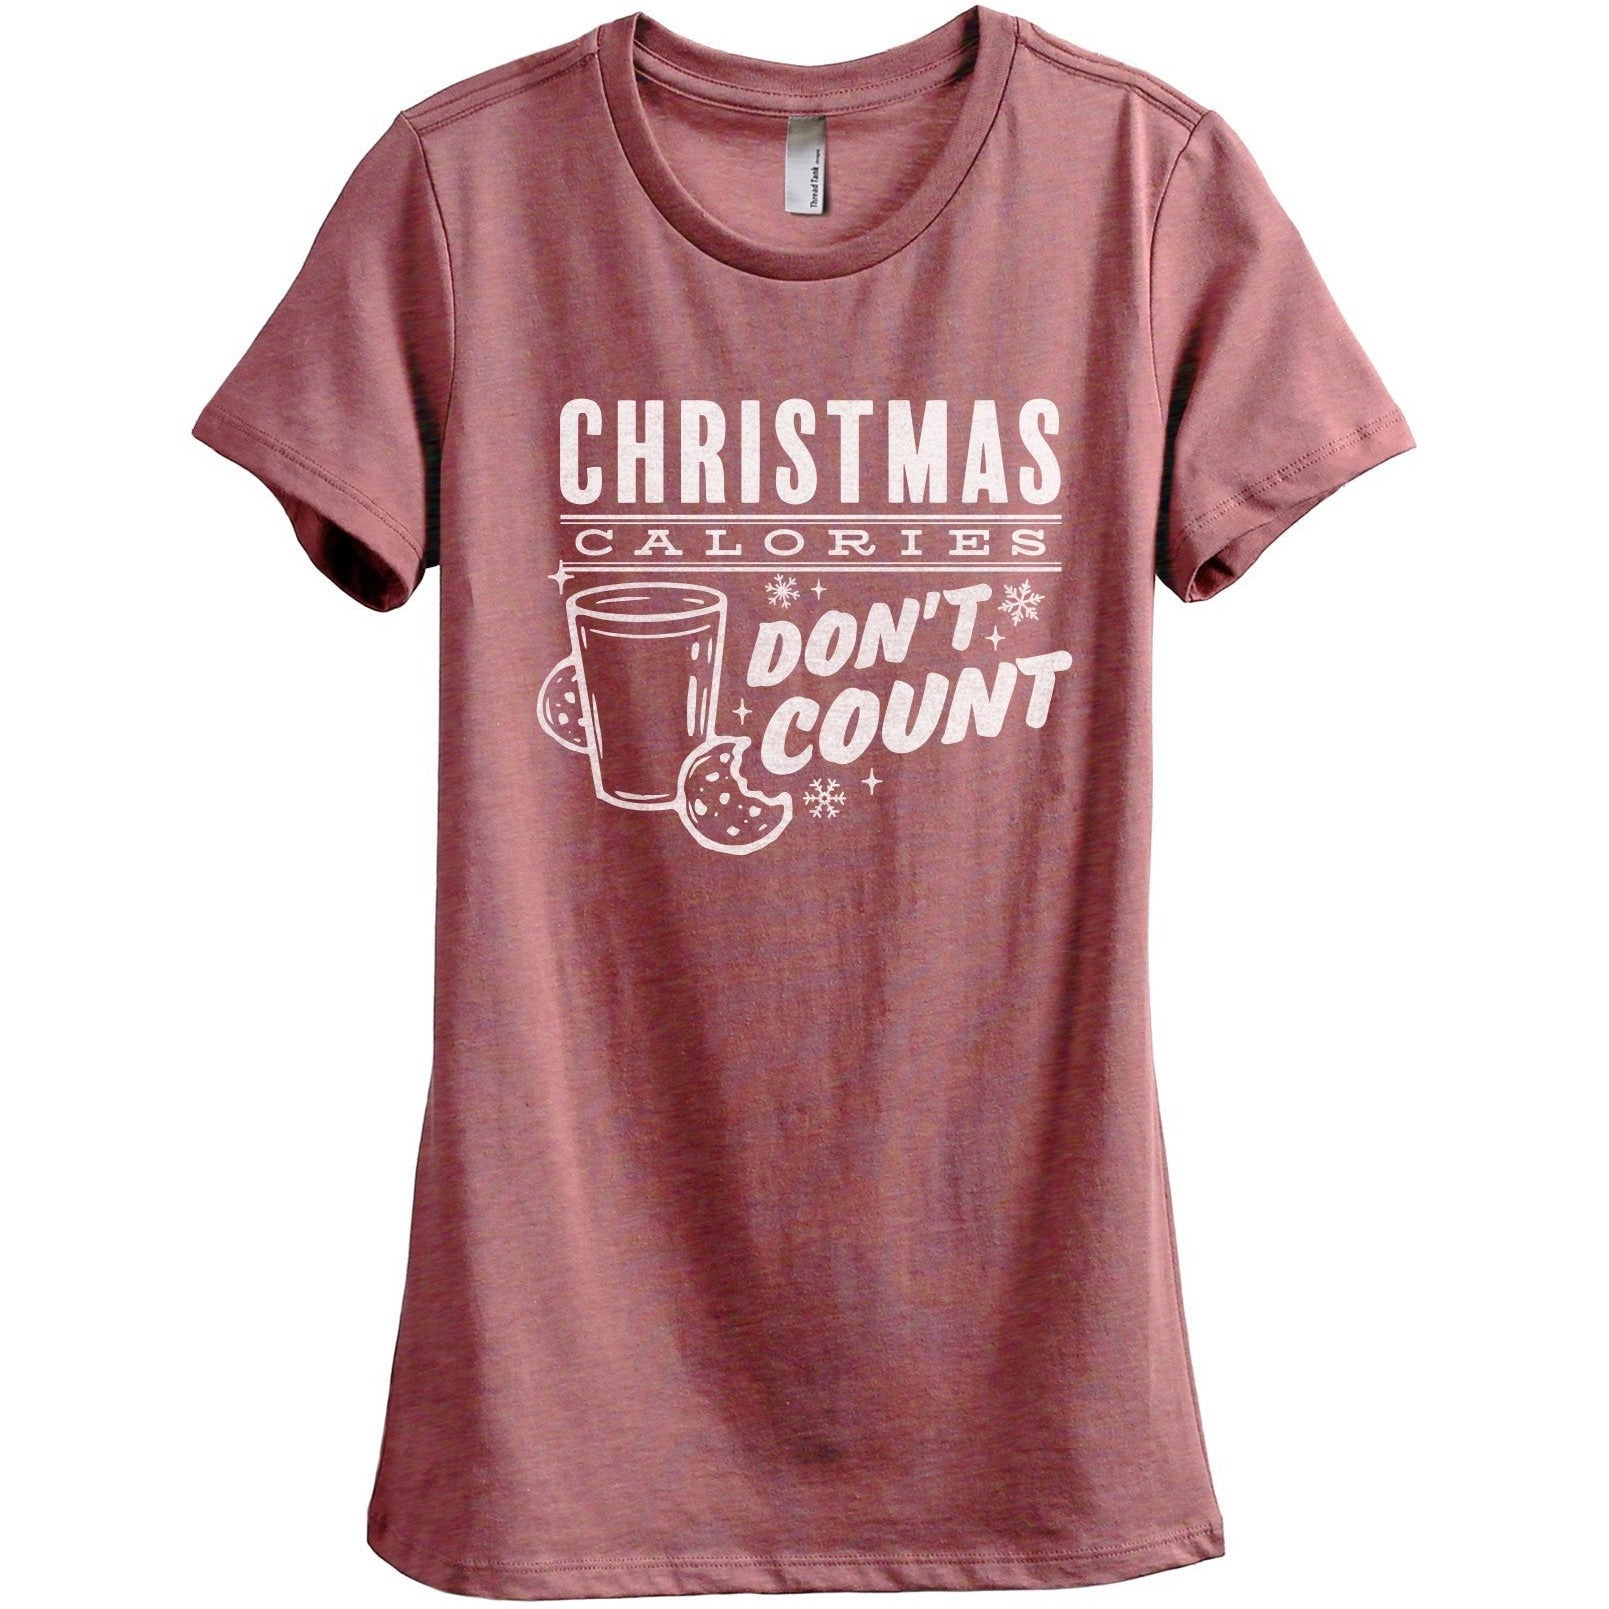 Christmas Calories Don't Count Women's Relaxed Crewneck T-Shirt Top Tee Heather Rouge